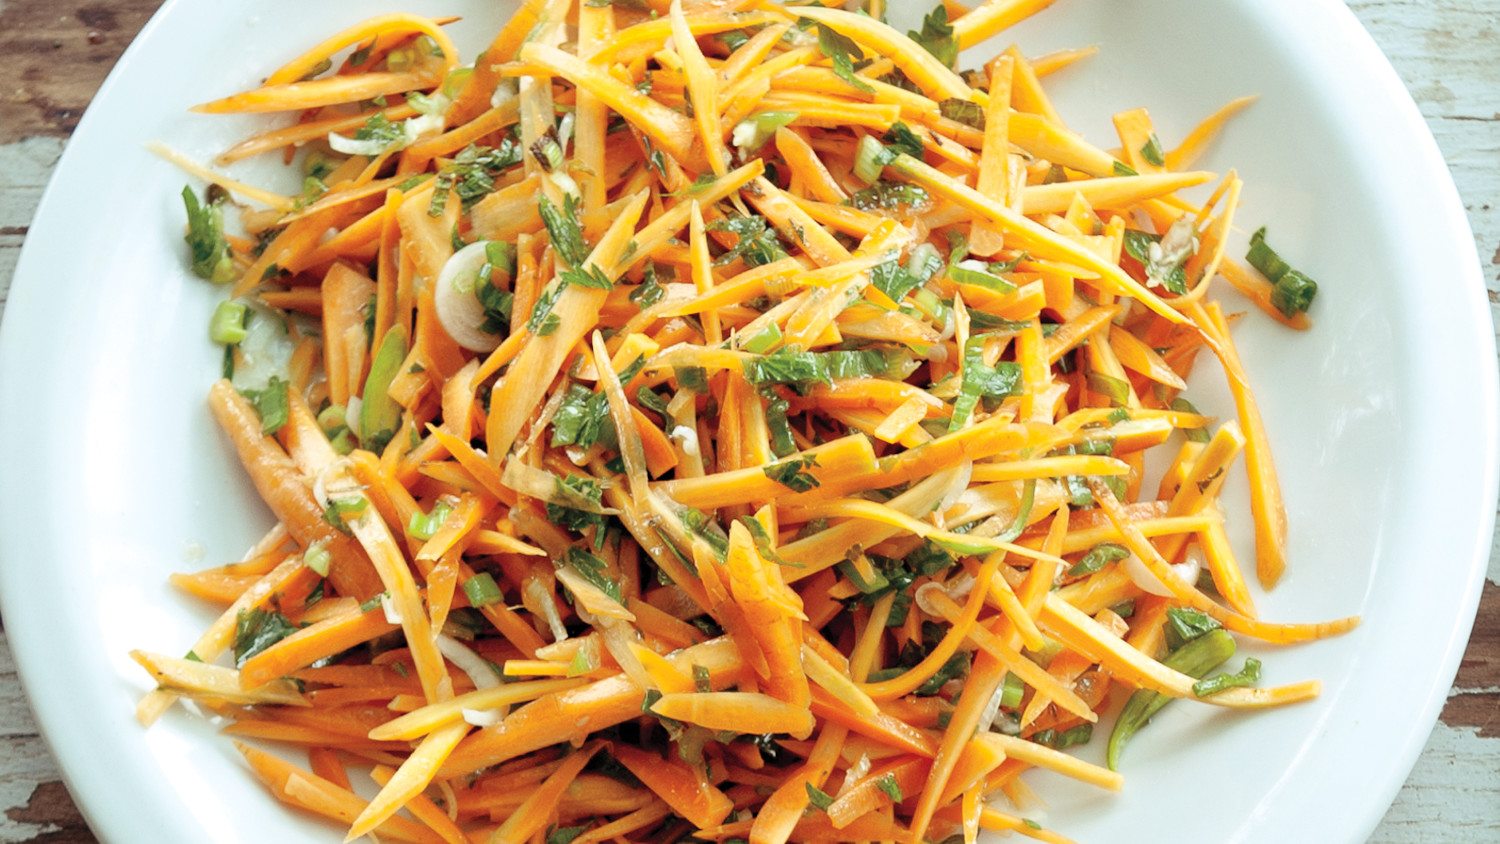 Carrot Salad with Parsley and Spring Onions.